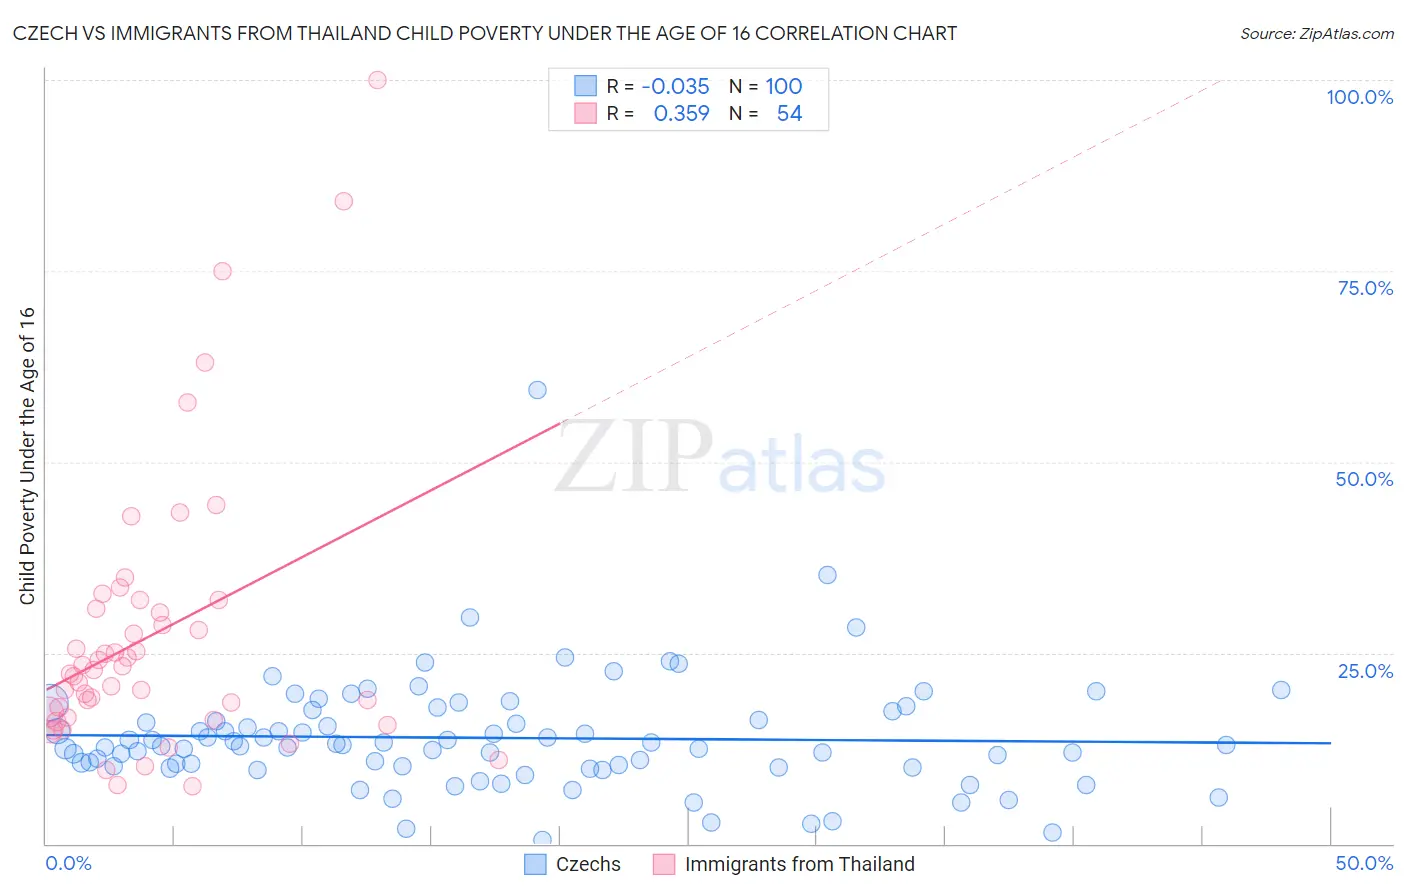 Czech vs Immigrants from Thailand Child Poverty Under the Age of 16